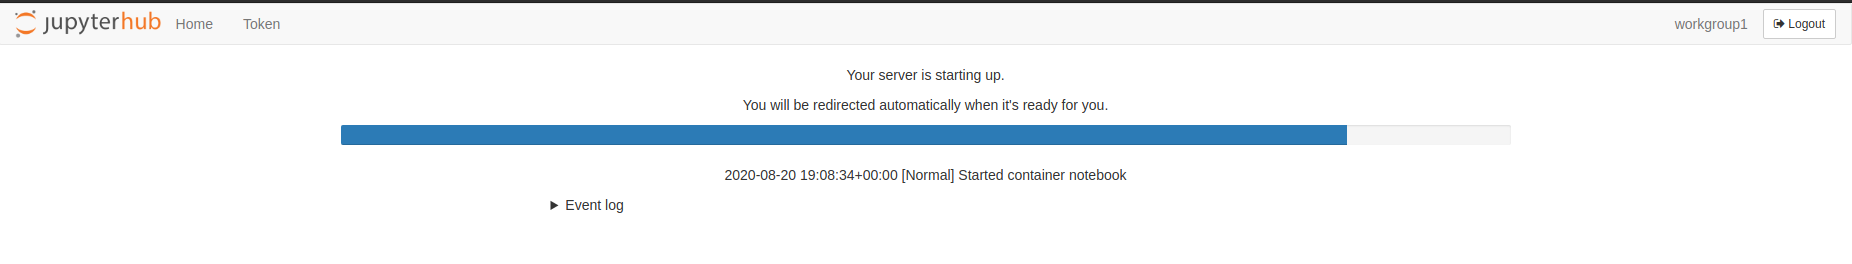 Wait for the server to start